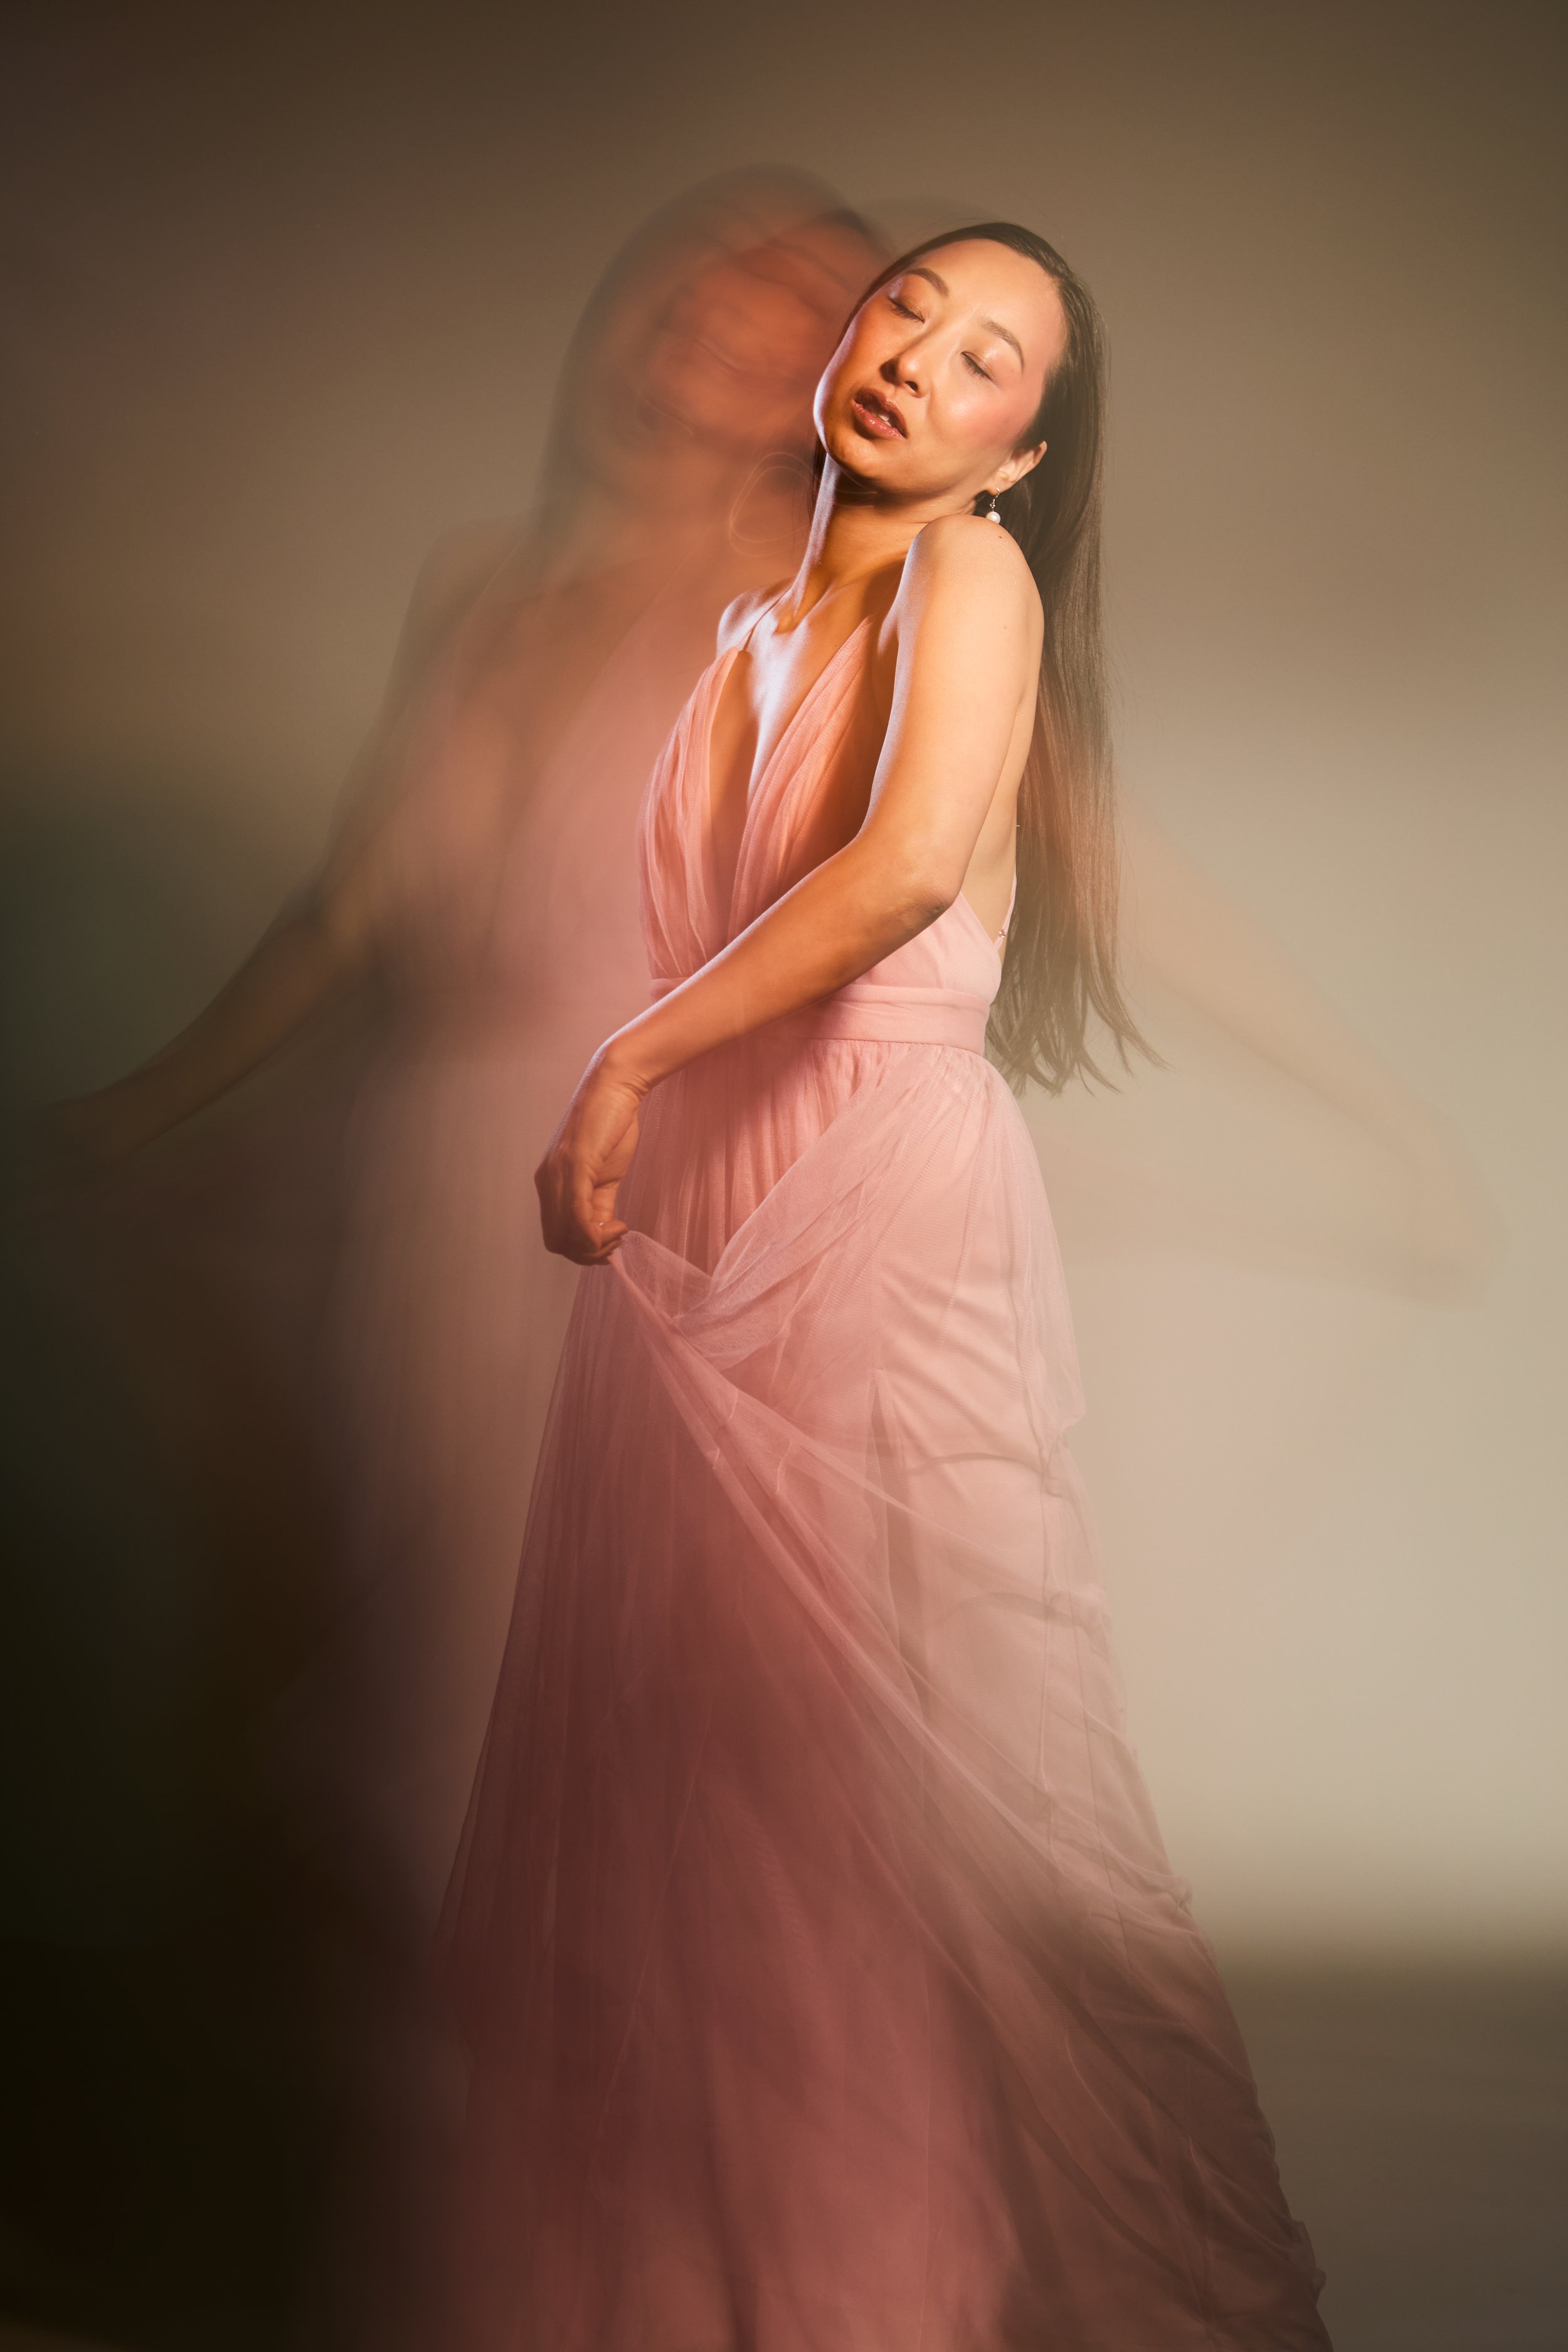 Chicago-portrait-photographer-model-pink-dress-motion-abstract-fashion-1